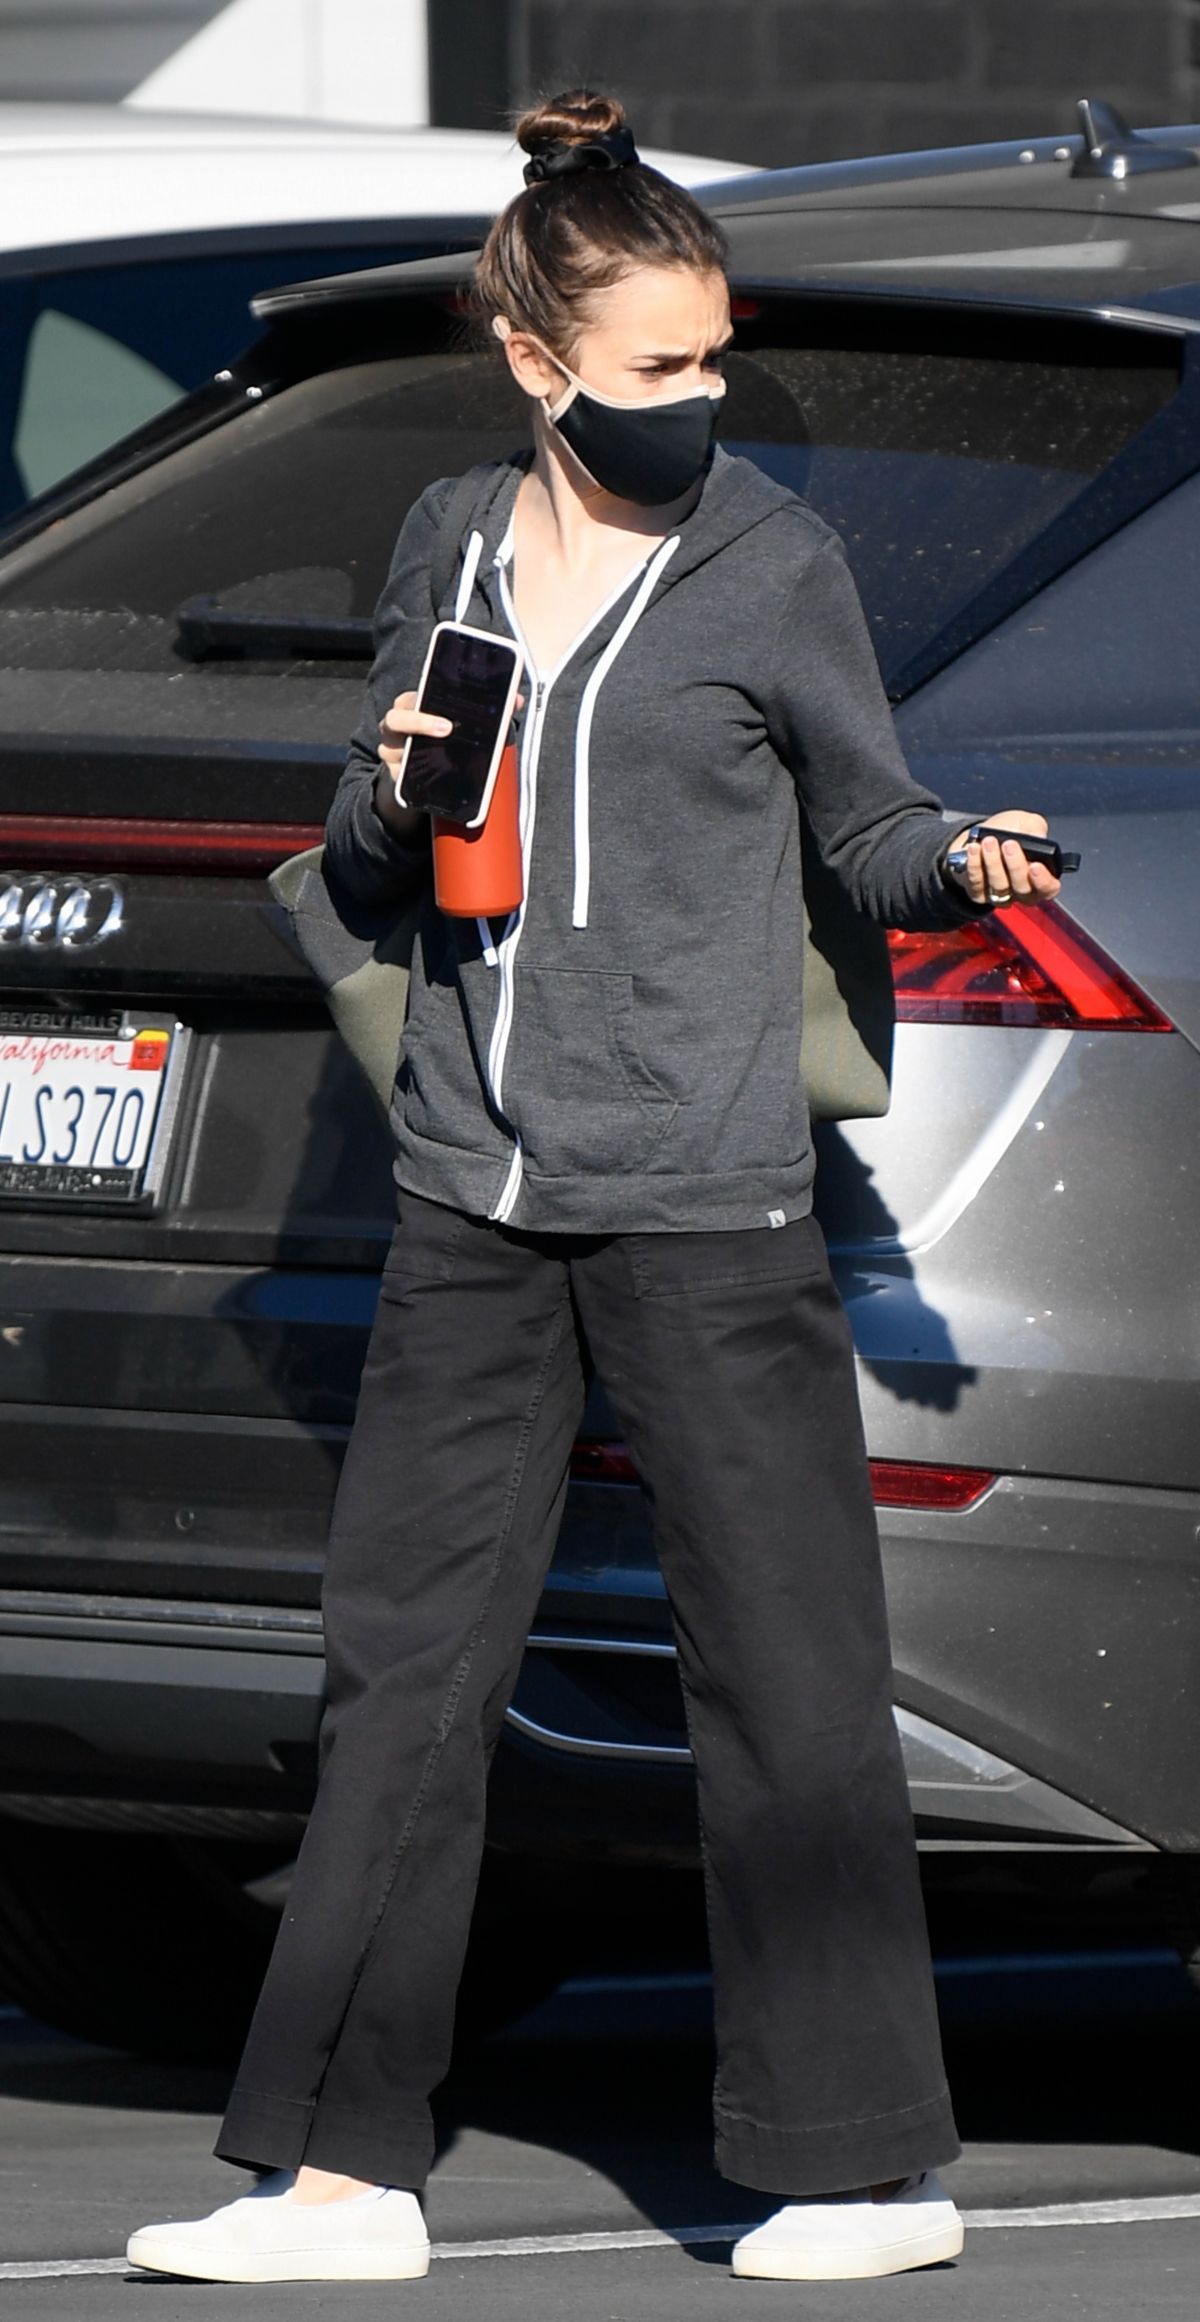 lily-collins-arrives-back-to-work-in-los-angeles-10-13-2020-3.jpg